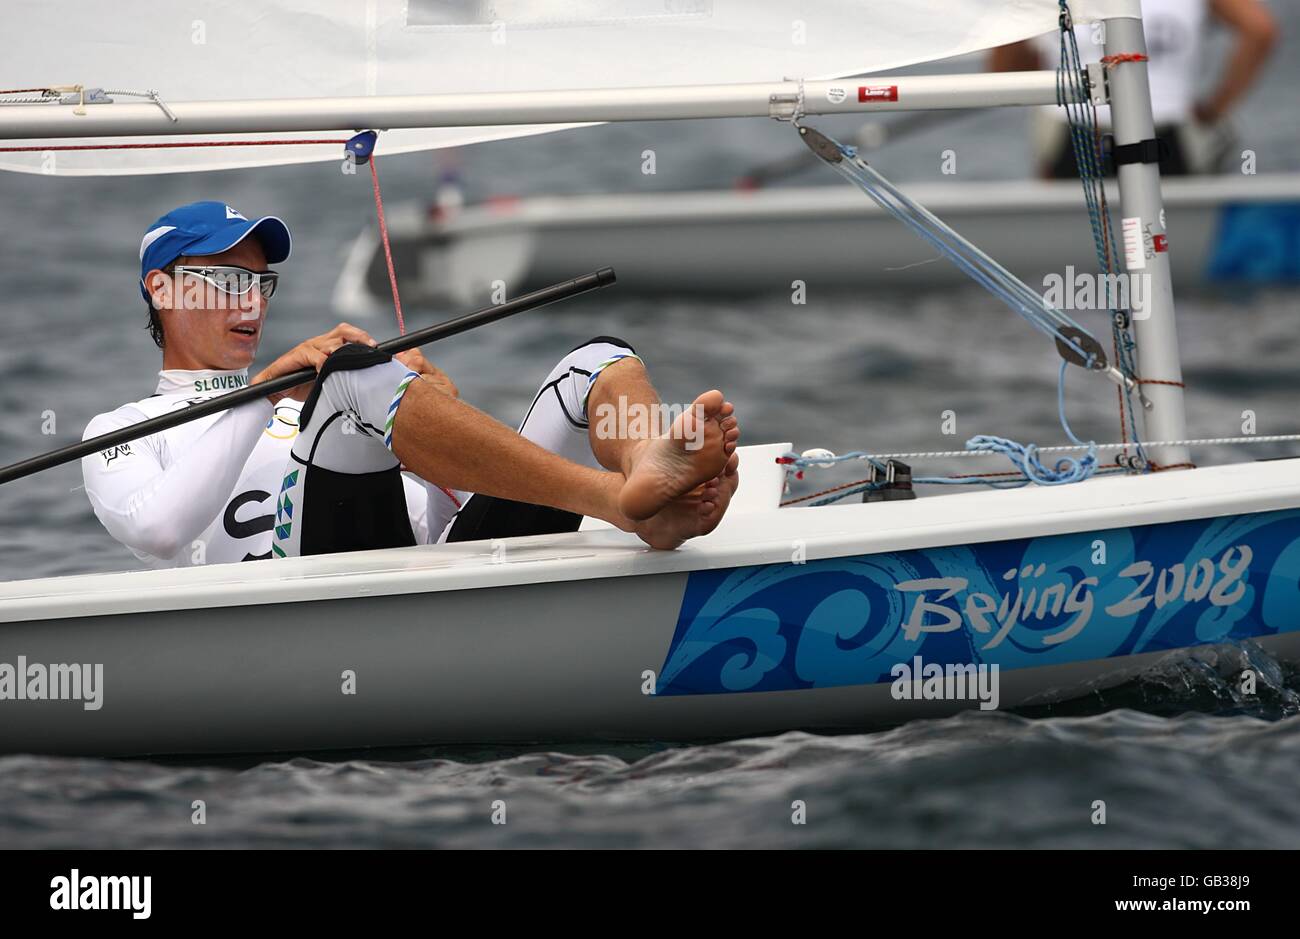 Slovakia's Vasilij Zbogar during the Men's Laser Radial Opening Series at the 2008 Beijing Olympic Games' Sailing Centre in Qingdao, China. Stock Photo